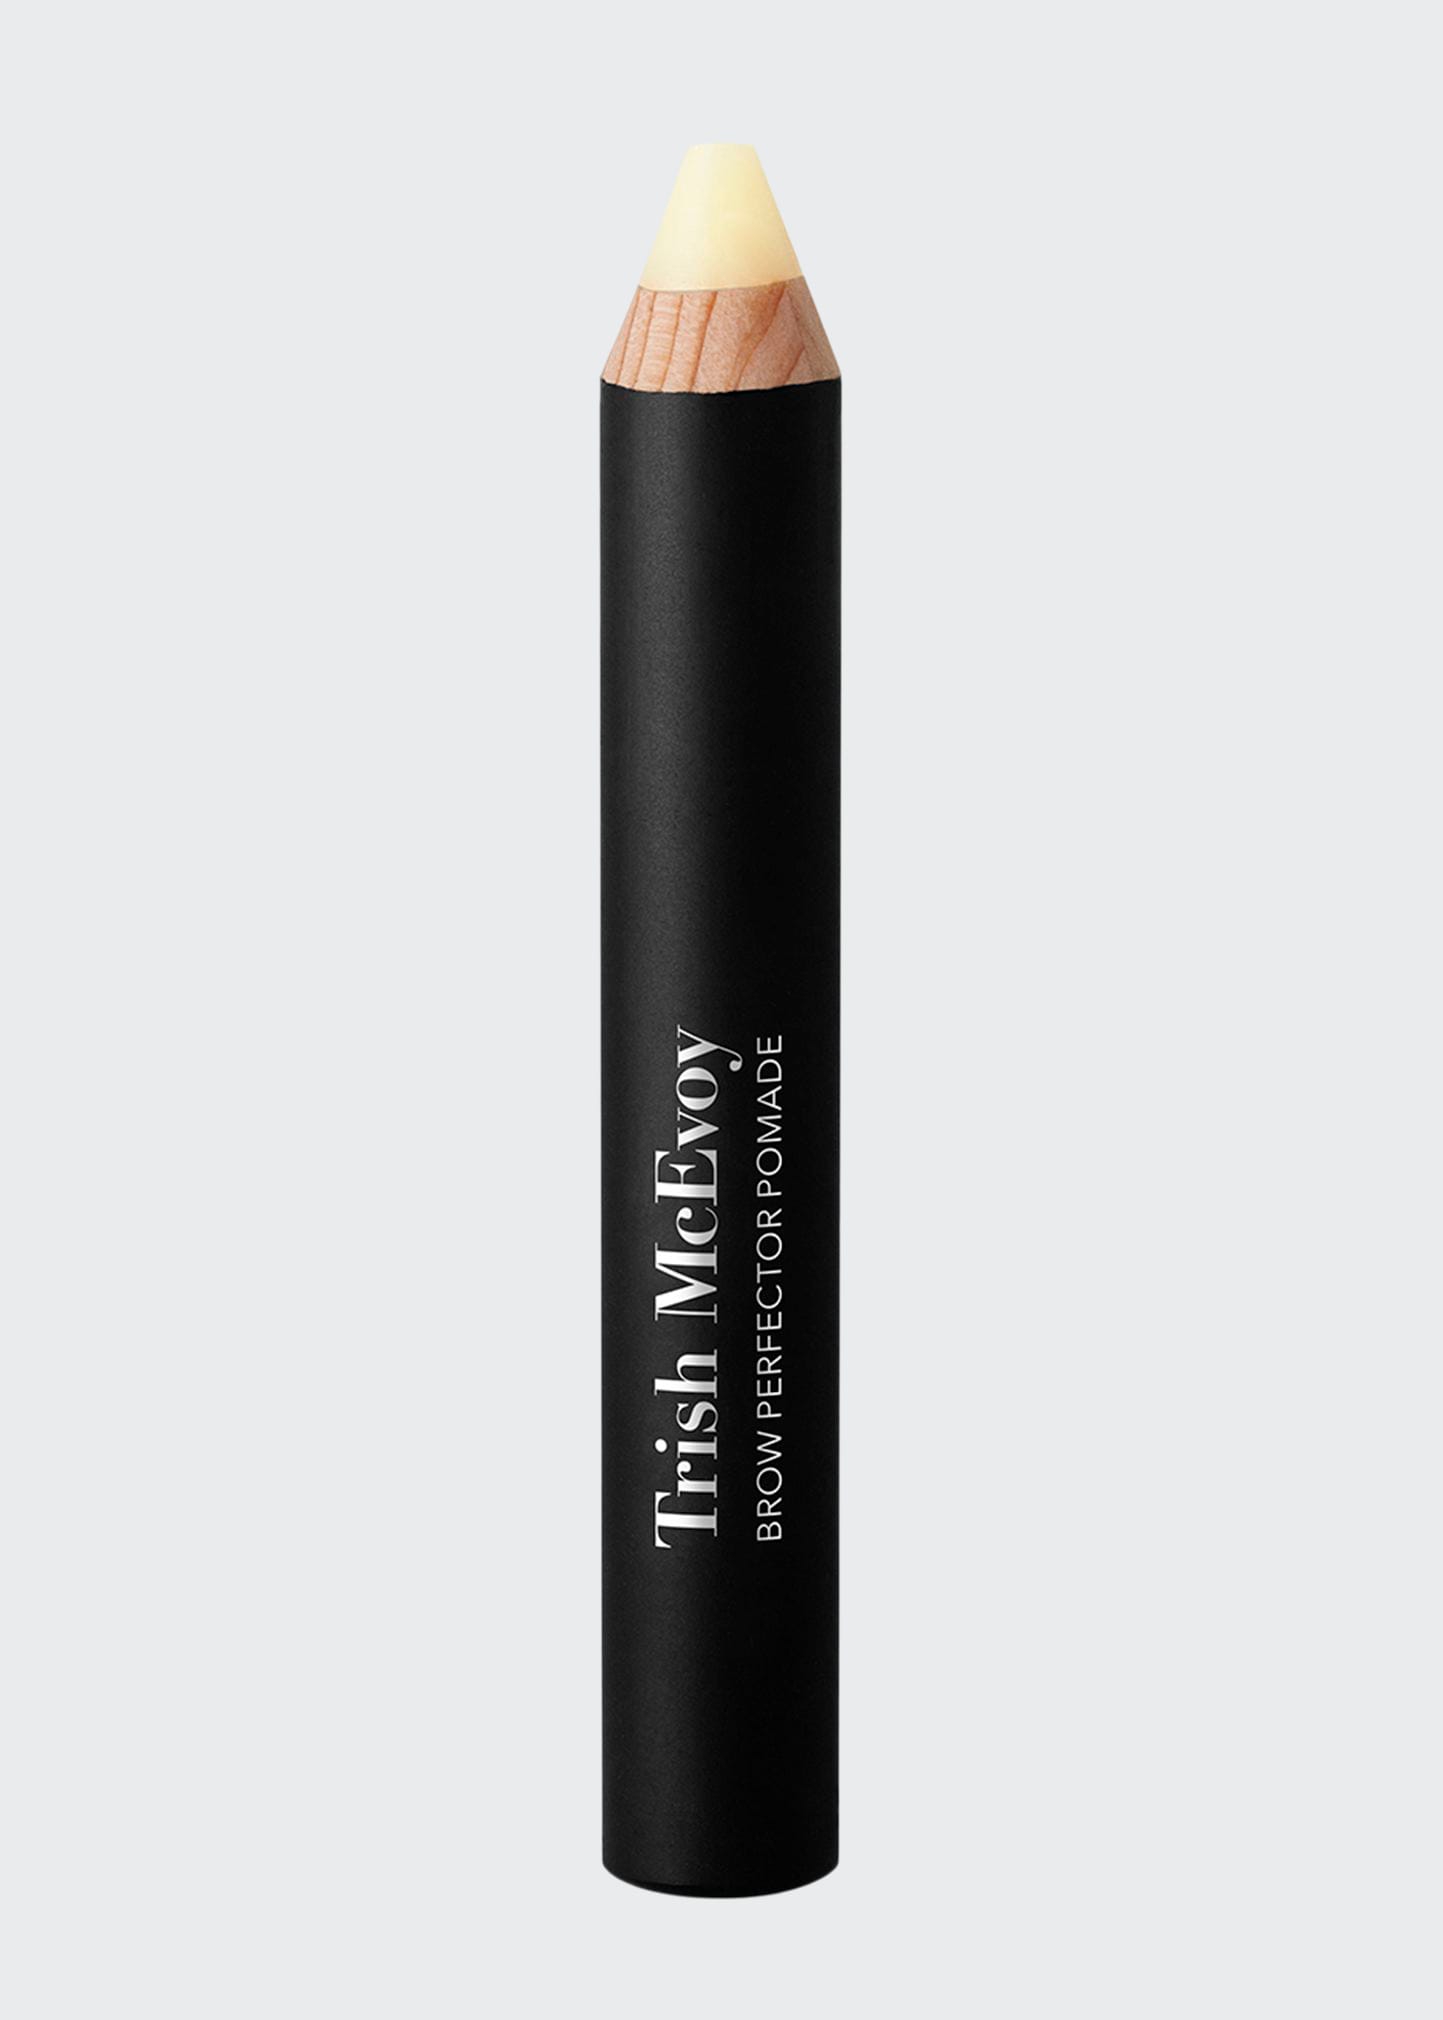 Trish Mcevoy Brow Perfector Pomade In Clear